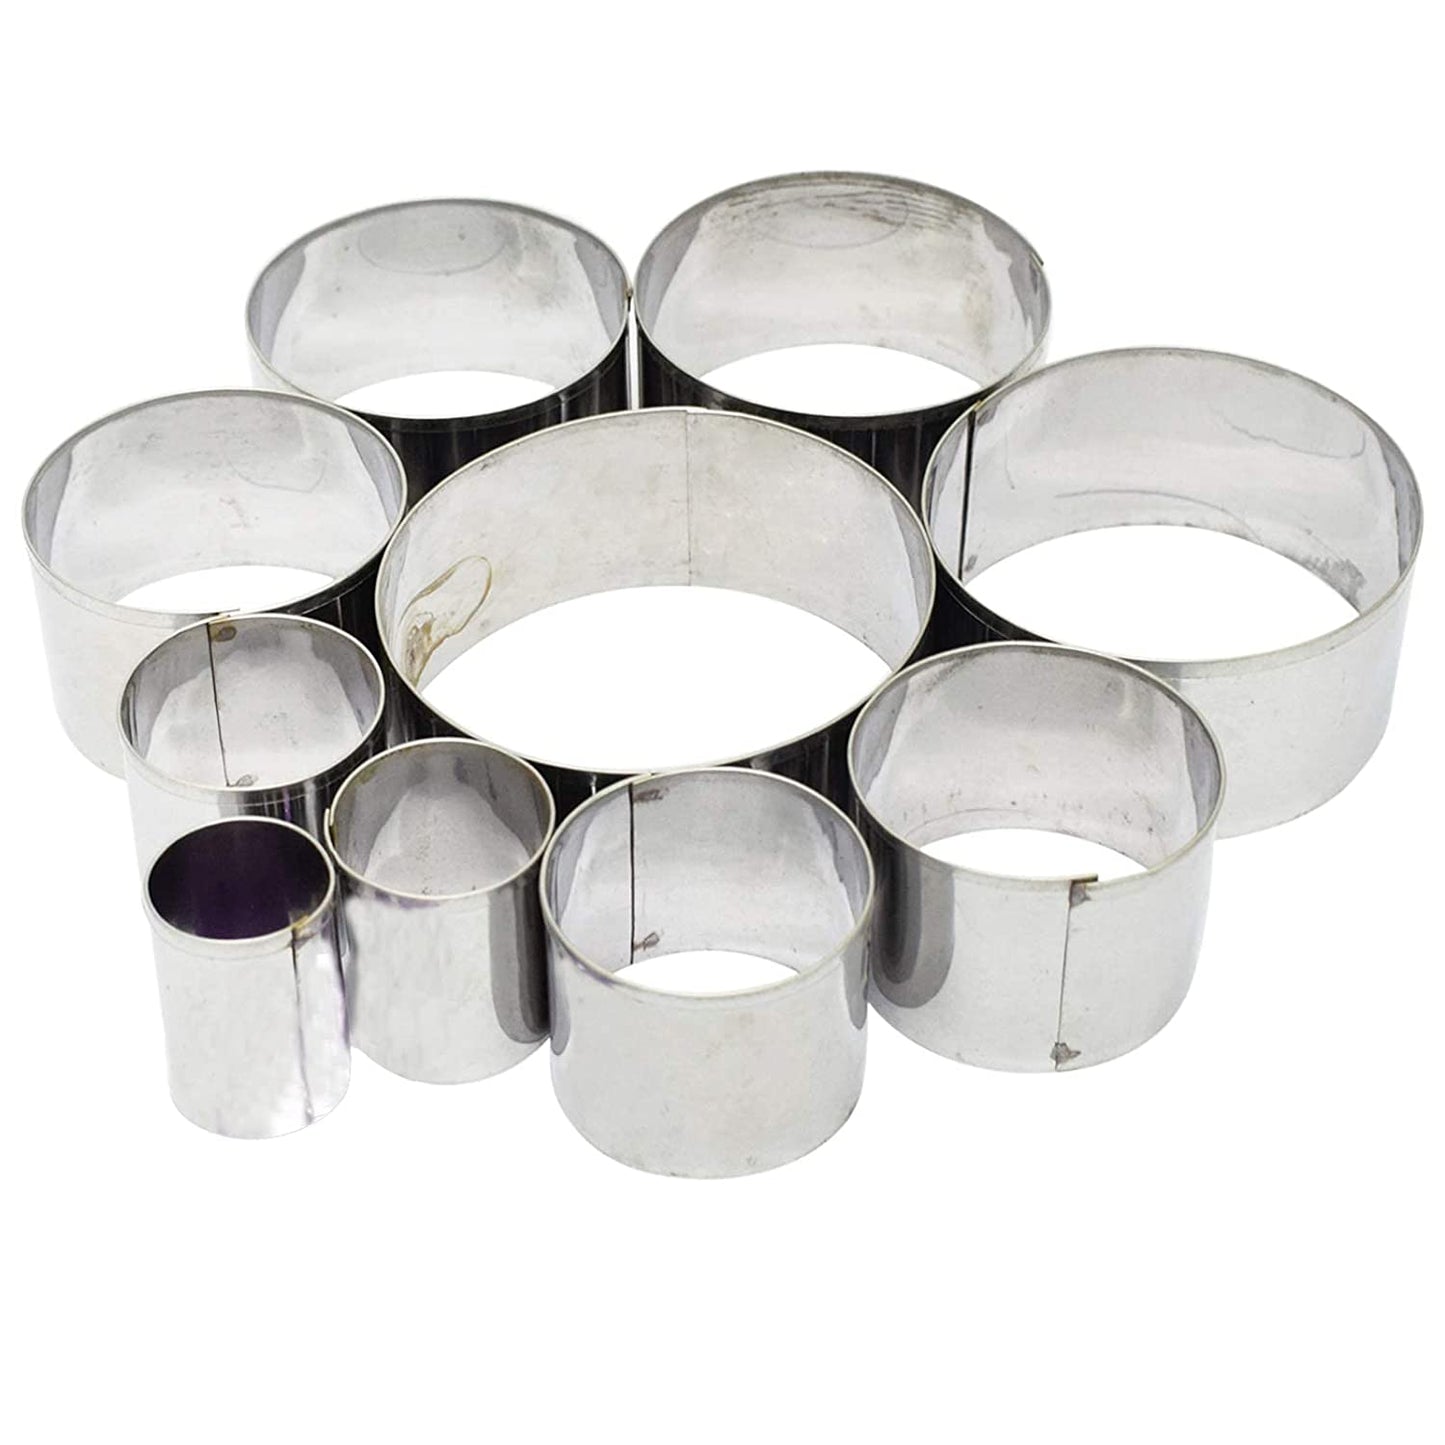 Stainless Steel Round Mini Cookie Cutte, Set of 10 Pieces Round, Size 3 to 10 CM